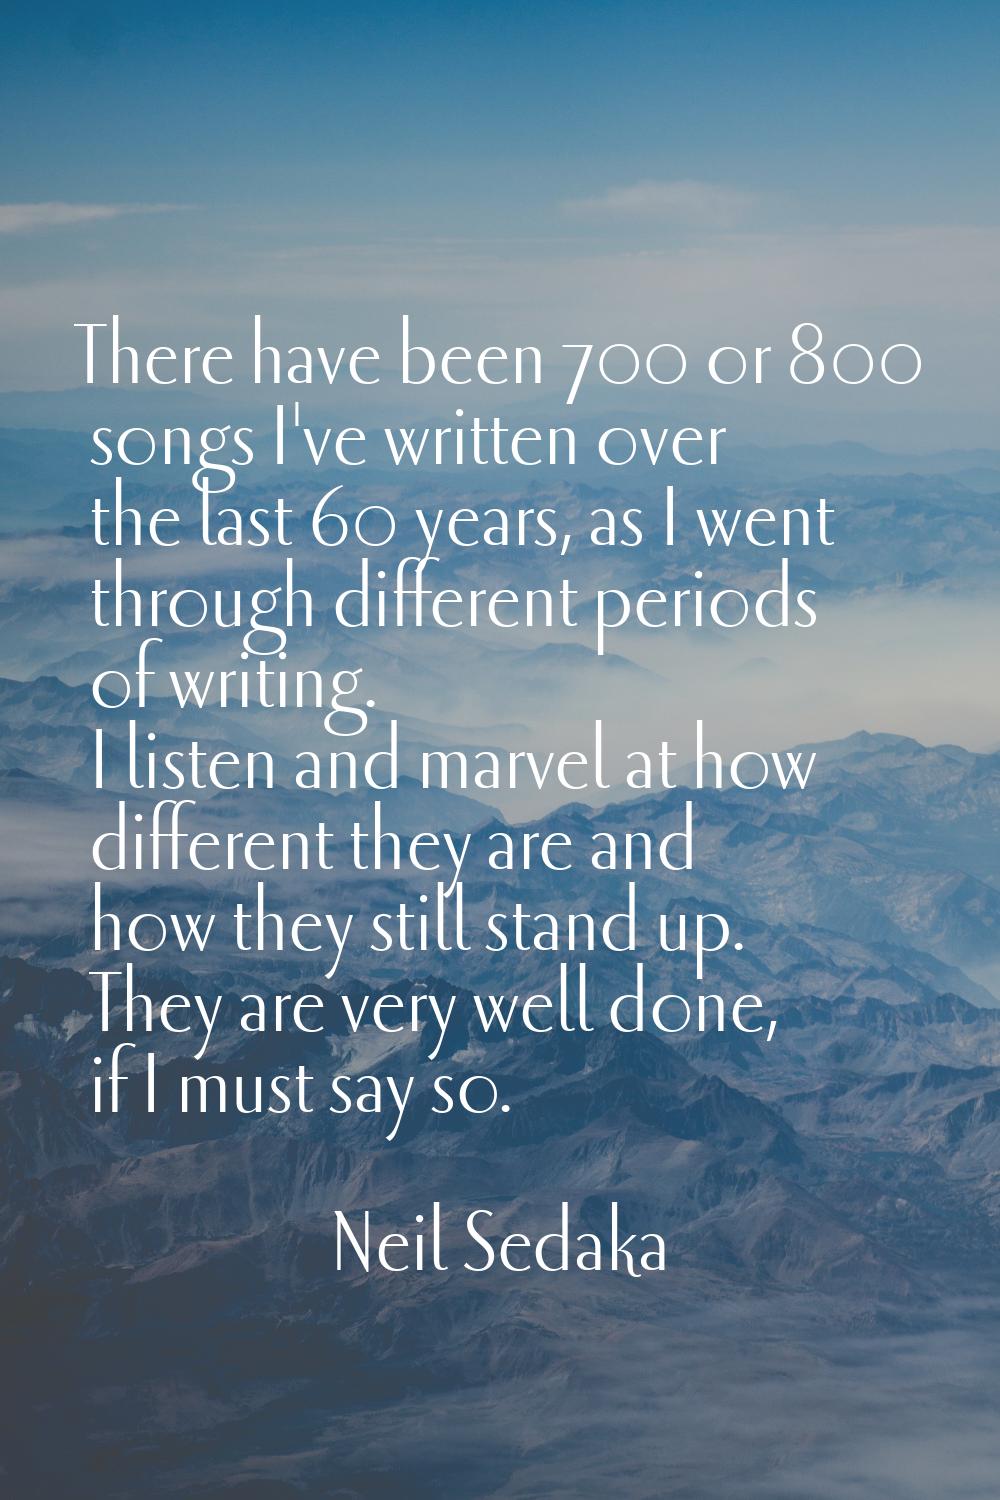 There have been 700 or 800 songs I've written over the last 60 years, as I went through different p